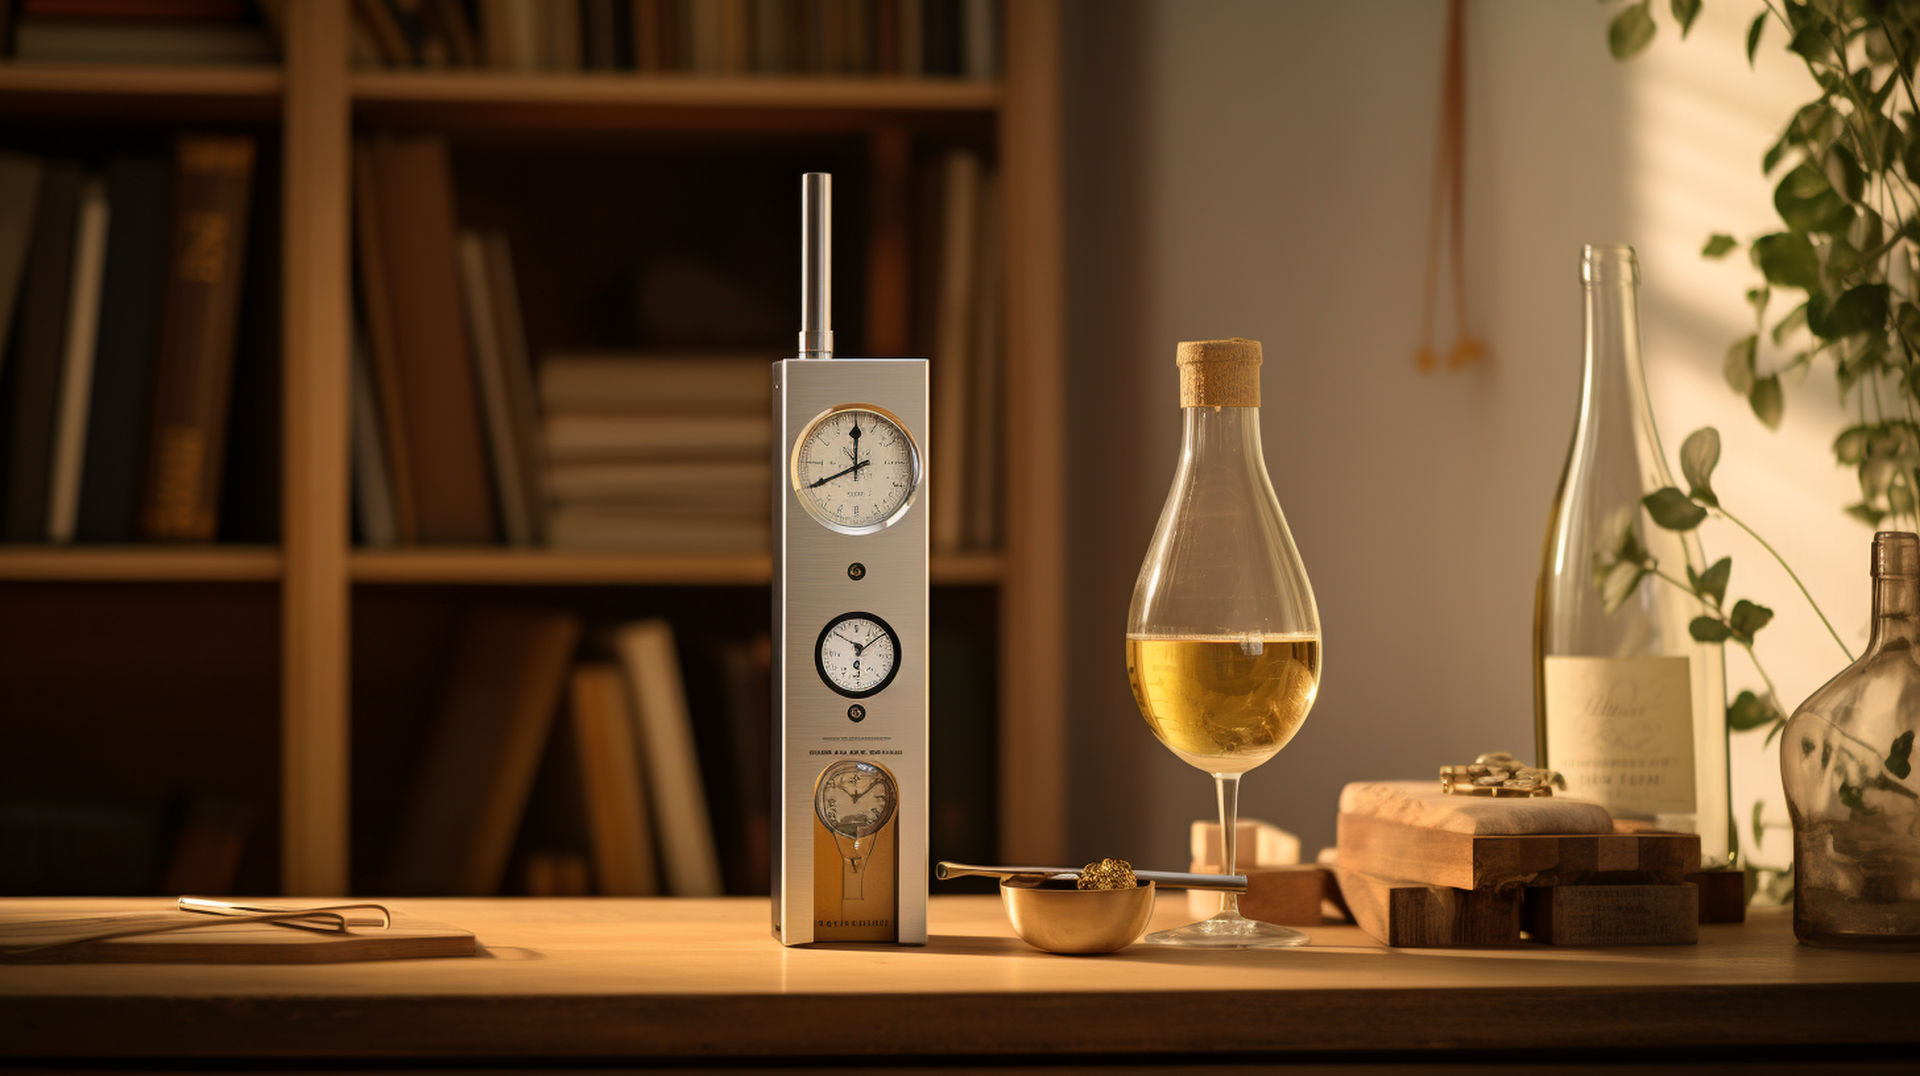 Image of a chilled Chardonnay bottle in an elegant wine rack, with a sophisticated wine glass, a wine opener, and a wine thermometer on a rustic wooden table.